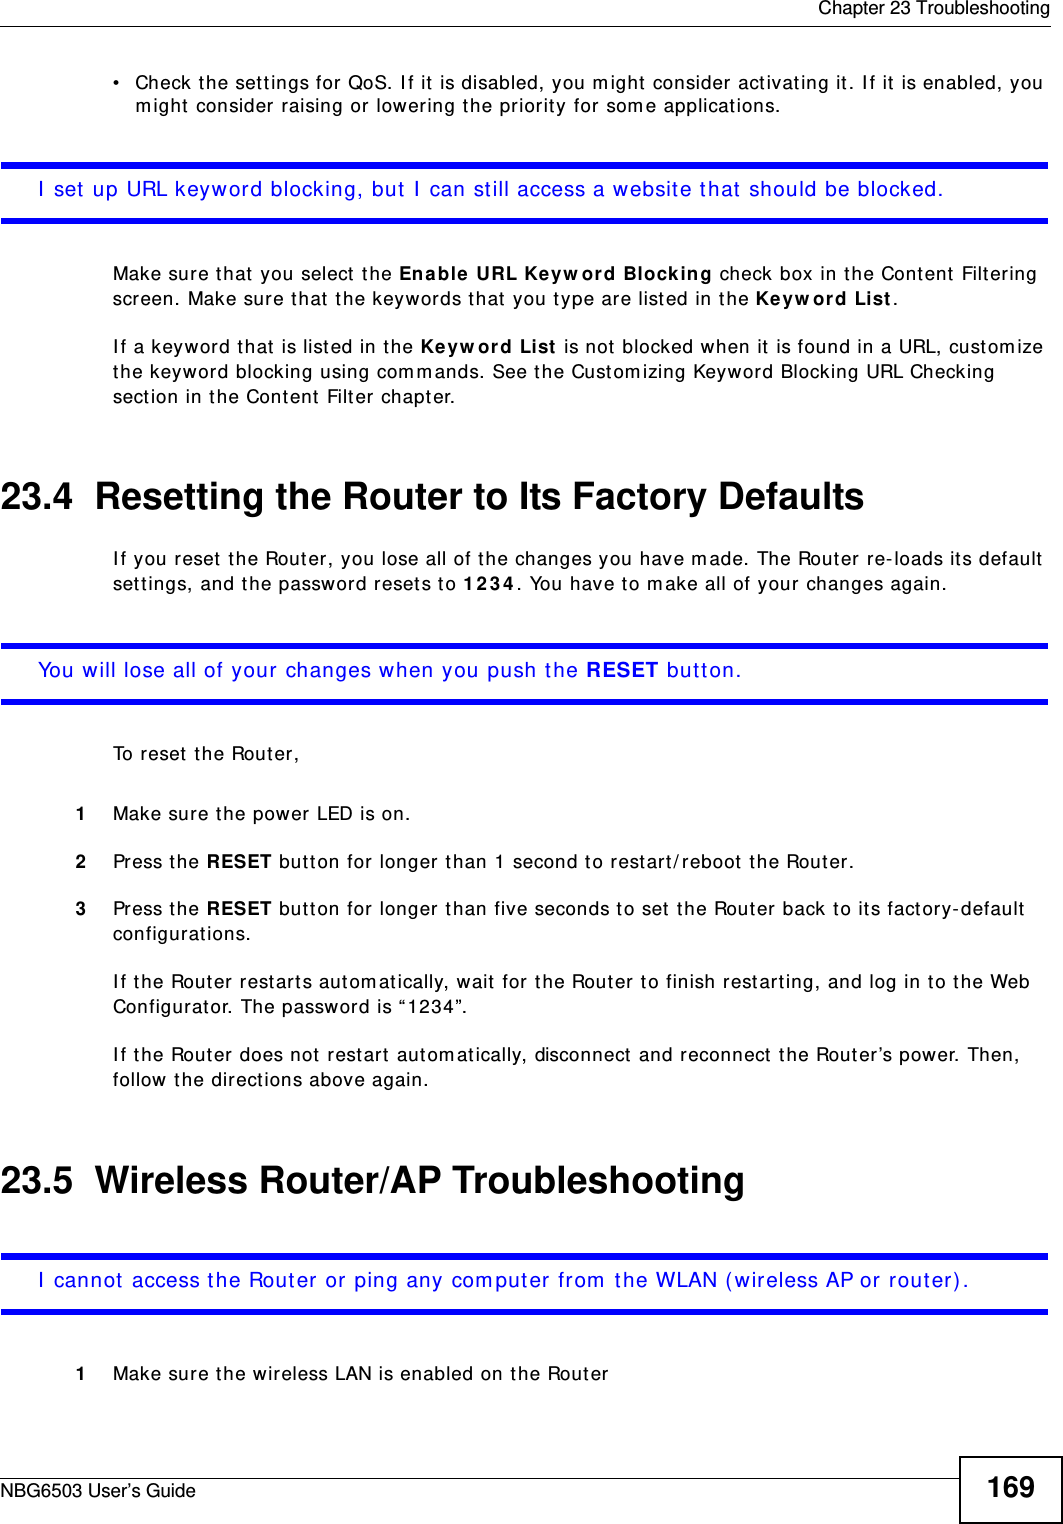  Chapter 23 TroubleshootingNBG6503 User’s Guide 169• Check the settings for QoS. If it is disabled, you might consider activating it. If it is enabled, you might consider raising or lowering the priority for some applications.I set up URL keyword blocking, but I can still access a website that should be blocked.Make sure that you select the Enable URL Keyword Blocking check box in the Content Filtering screen. Make sure that the keywords that you type are listed in the Keyword List. If a keyword that is listed in the Keyword List is not blocked when it is found in a URL, customize the keyword blocking using commands. See the Customizing Keyword Blocking URL Checking section in the Content Filter chapter.23.4  Resetting the Router to Its Factory Defaults If you reset the Router, you lose all of the changes you have made. The Router re-loads its default settings, and the password resets to 1234. You have to make all of your changes again.You will lose all of your changes when you push the RESET button.To reset the Router,1Make sure the power LED is on.2Press the RESET button for longer than 1 second to restart/reboot the Router.3Press the RESET button for longer than five seconds to set the Router back to its factory-default configurations.If the Router restarts automatically, wait for the Router to finish restarting, and log in to the Web Configurator. The password is “1234”.If the Router does not restart automatically, disconnect and reconnect the Router’s power. Then, follow the directions above again.23.5  Wireless Router/AP TroubleshootingI cannot access the Router or ping any computer from the WLAN (wireless AP or router).1Make sure the wireless LAN is enabled on the Router